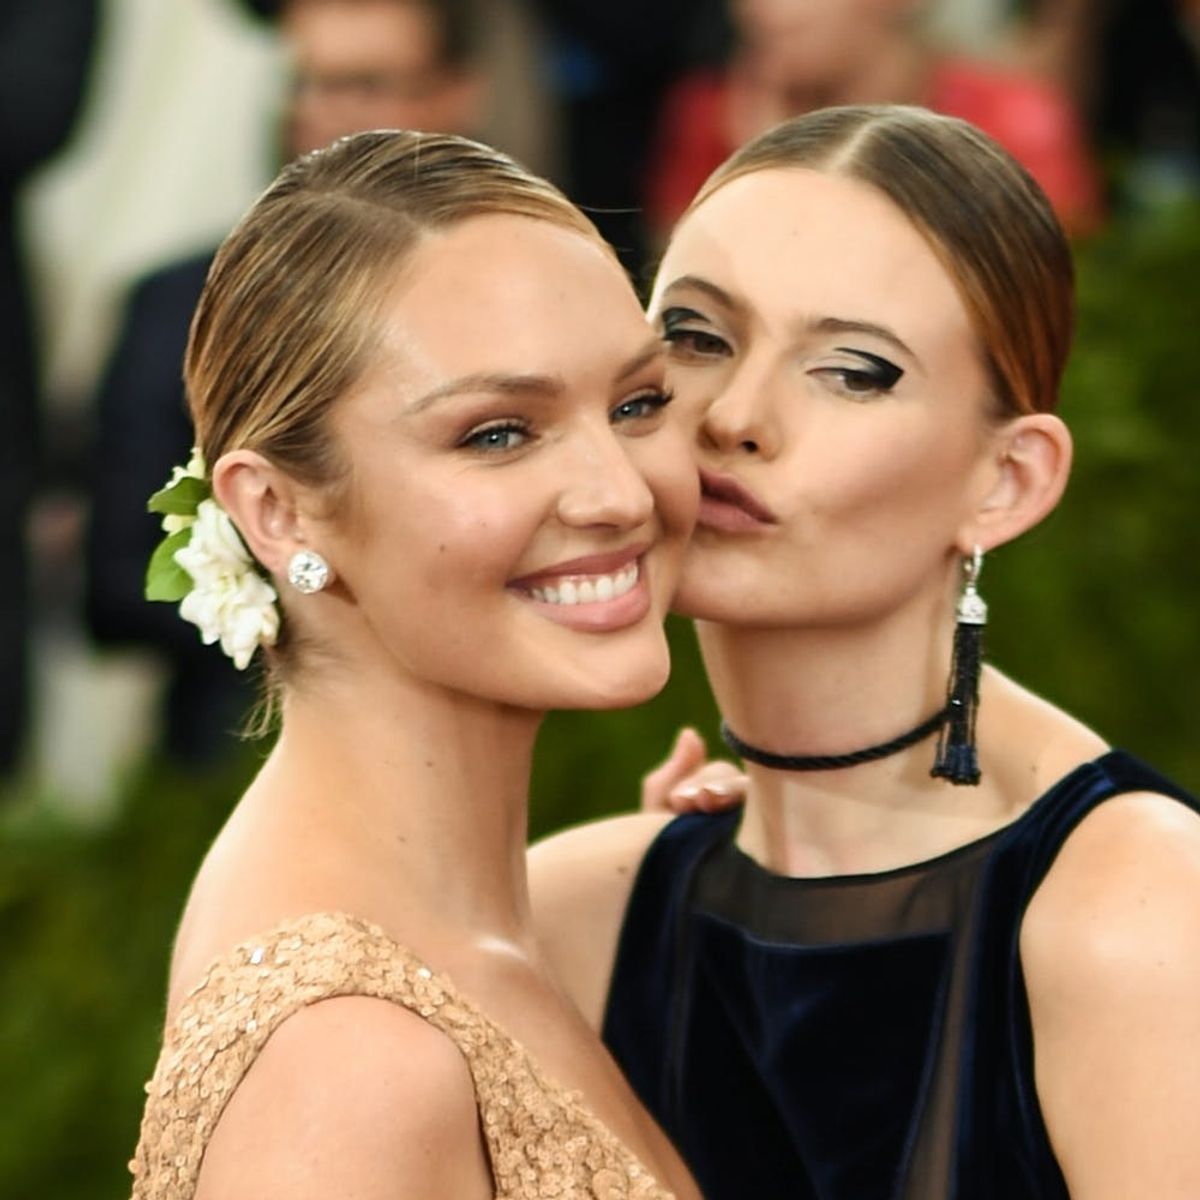 Candice Swanepoel and Behati Prinsloo Are Pregnant at the Same Time… AGAIN!